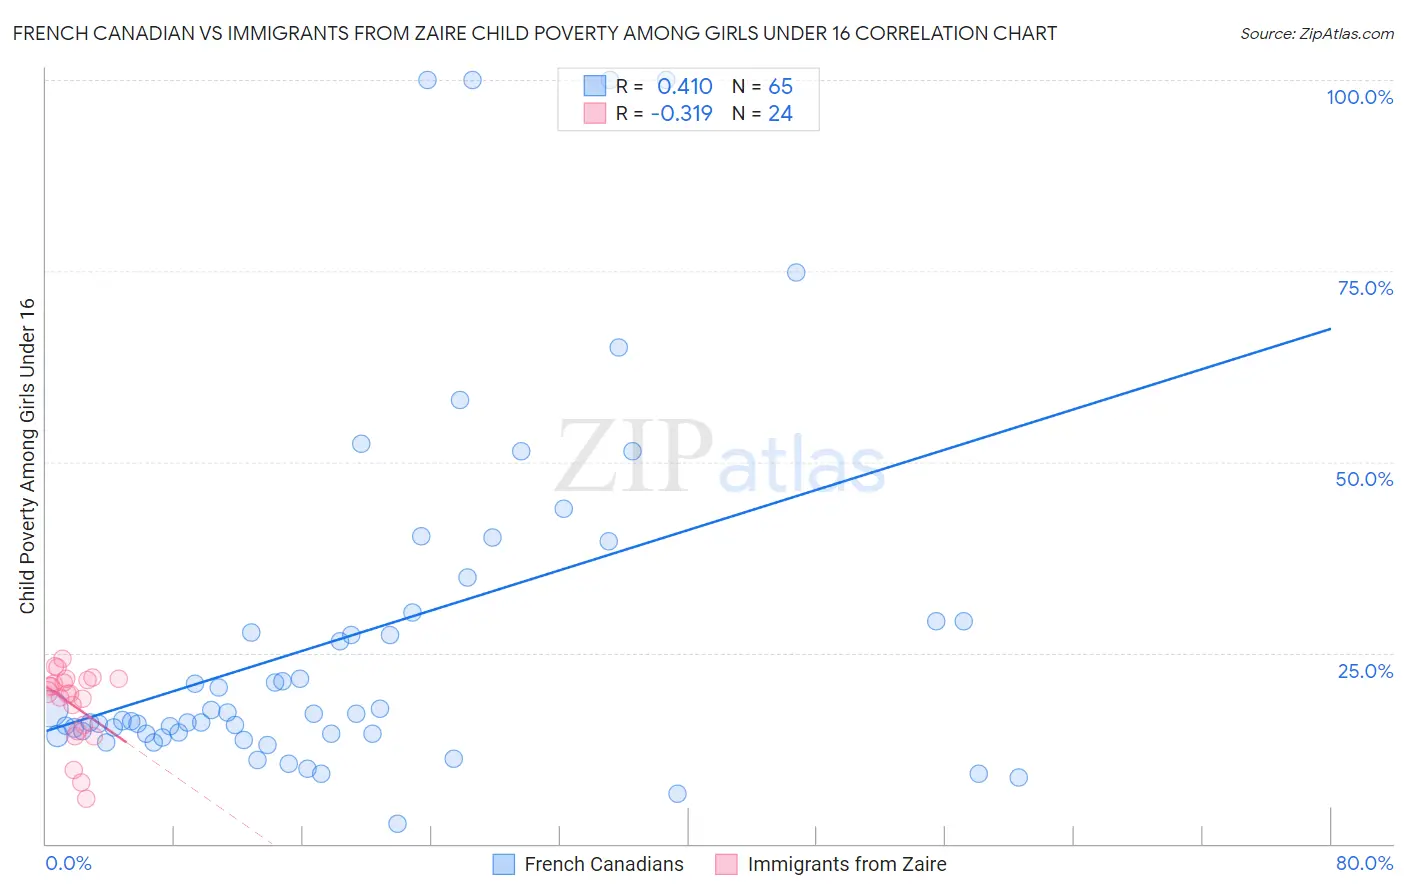 French Canadian vs Immigrants from Zaire Child Poverty Among Girls Under 16